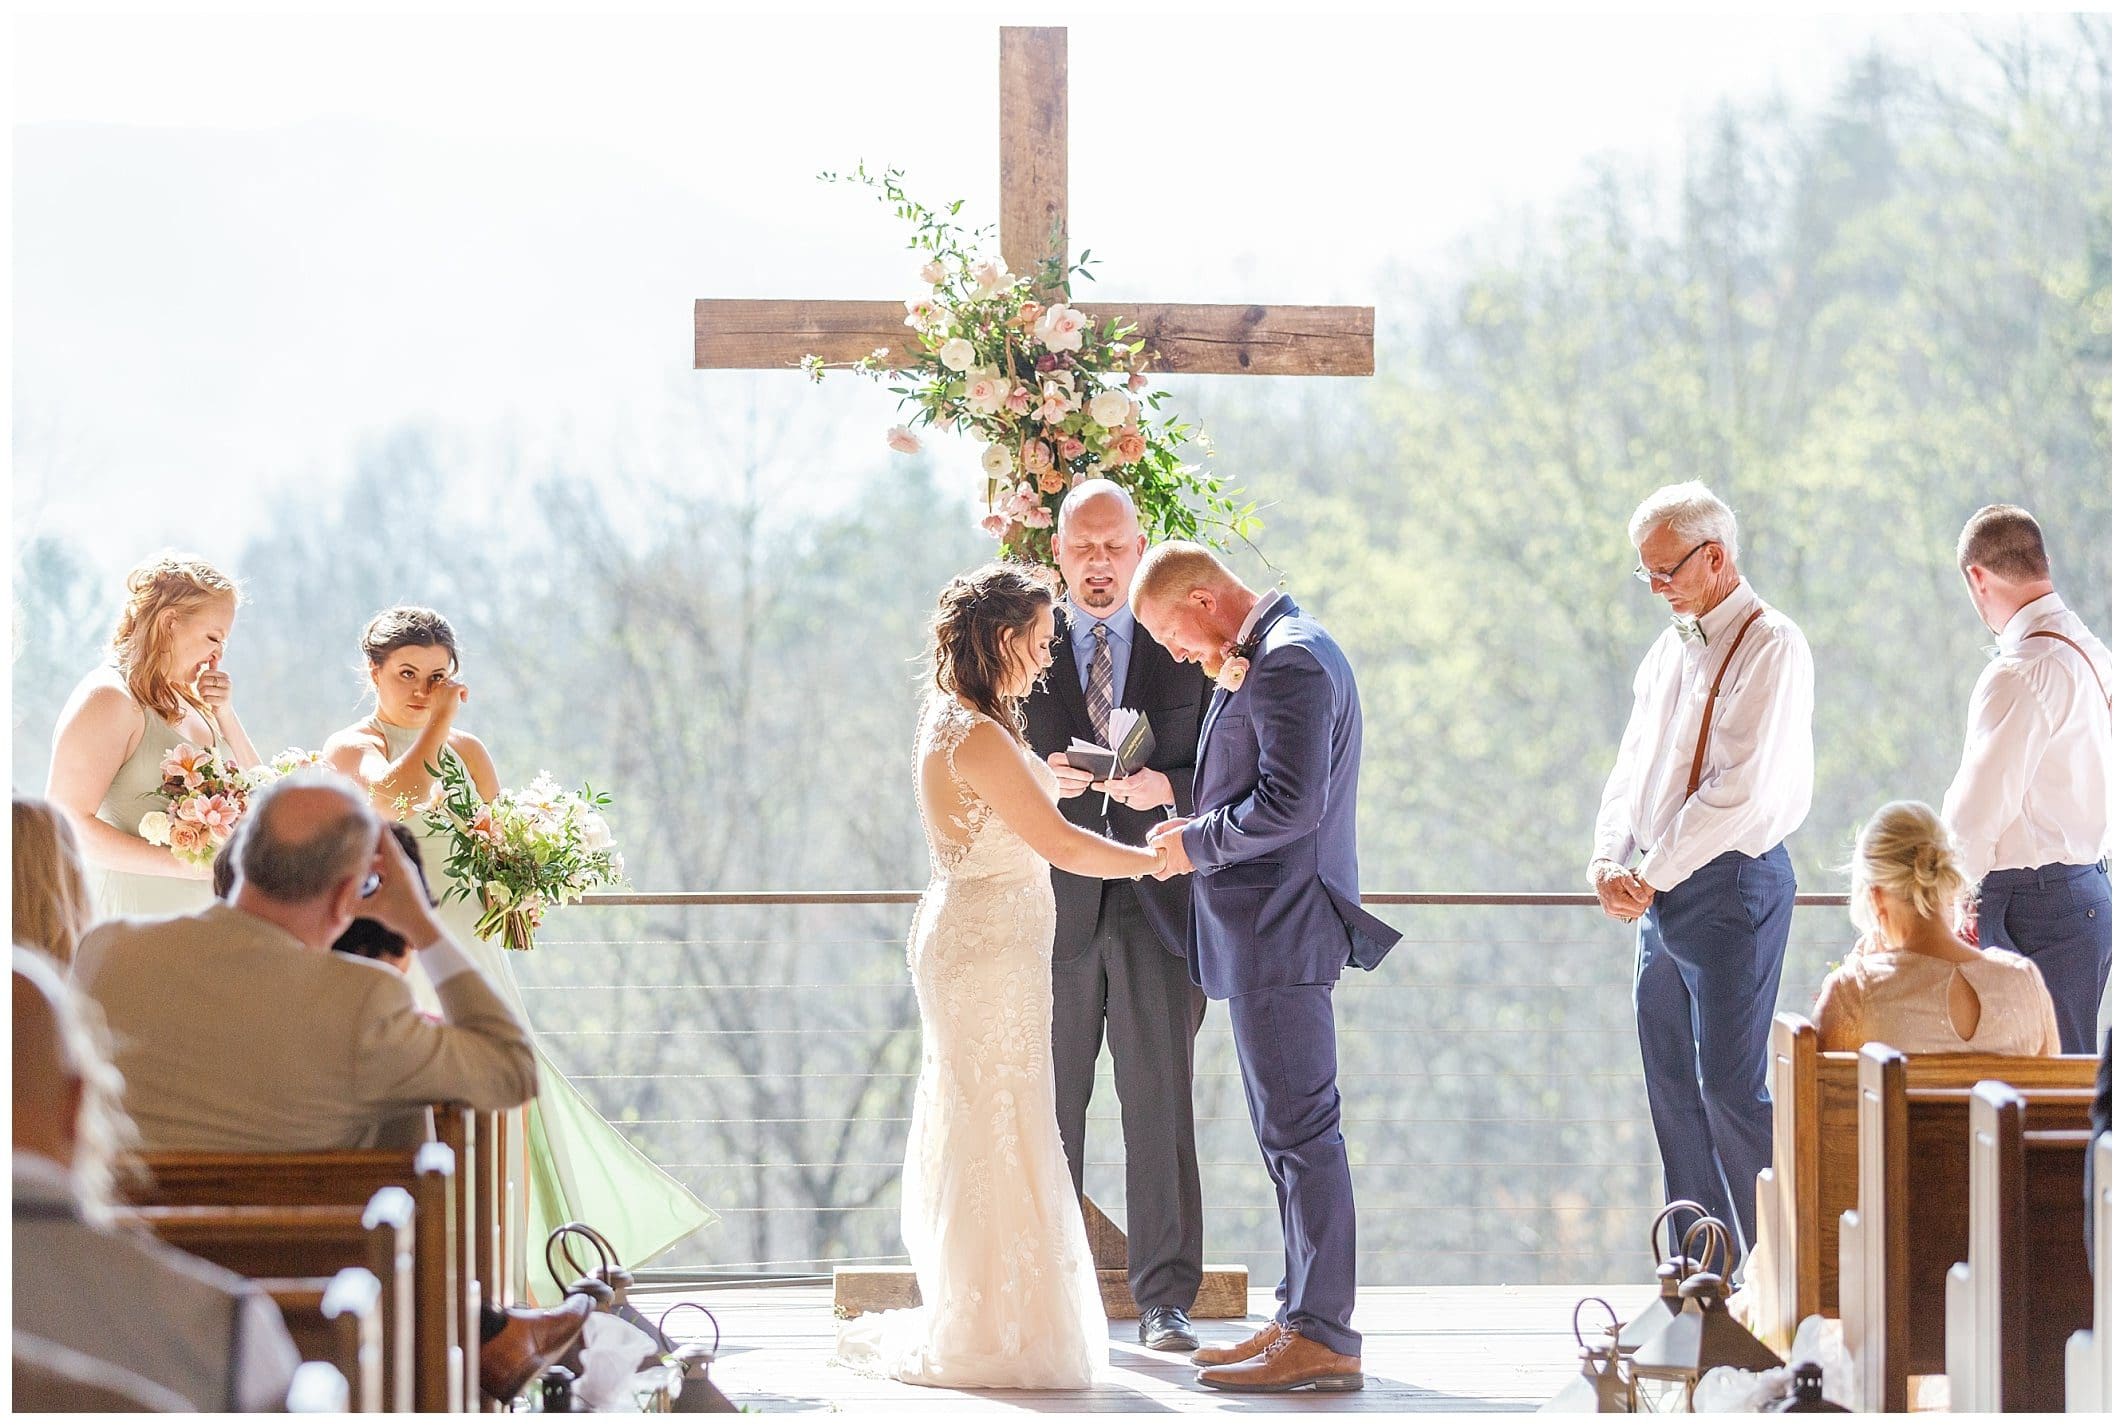 Joyful spring wedding at Parker's Mill overlooking with mountains with the wind blowing.